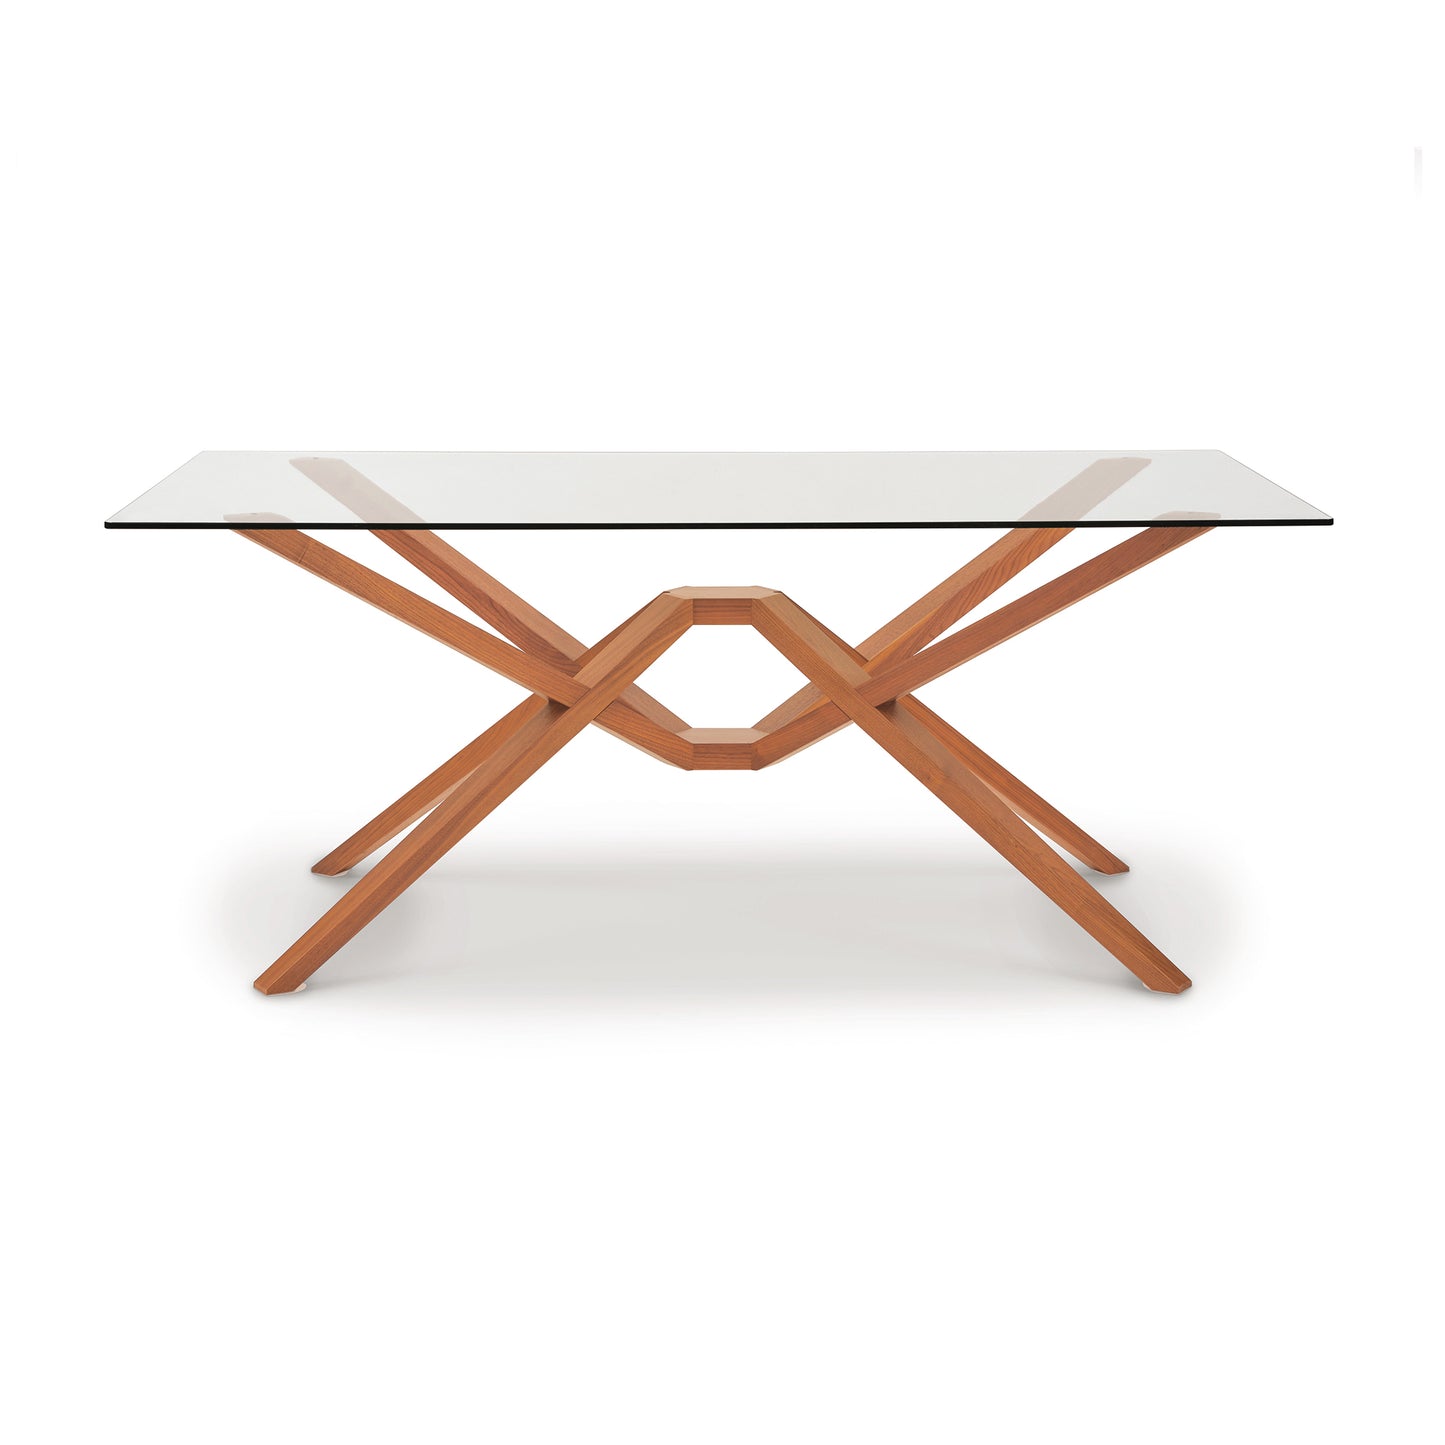 A modern Copeland Furniture Exeter Rectangular Glass Top Table with a solid wood x-shaped base on a white background.